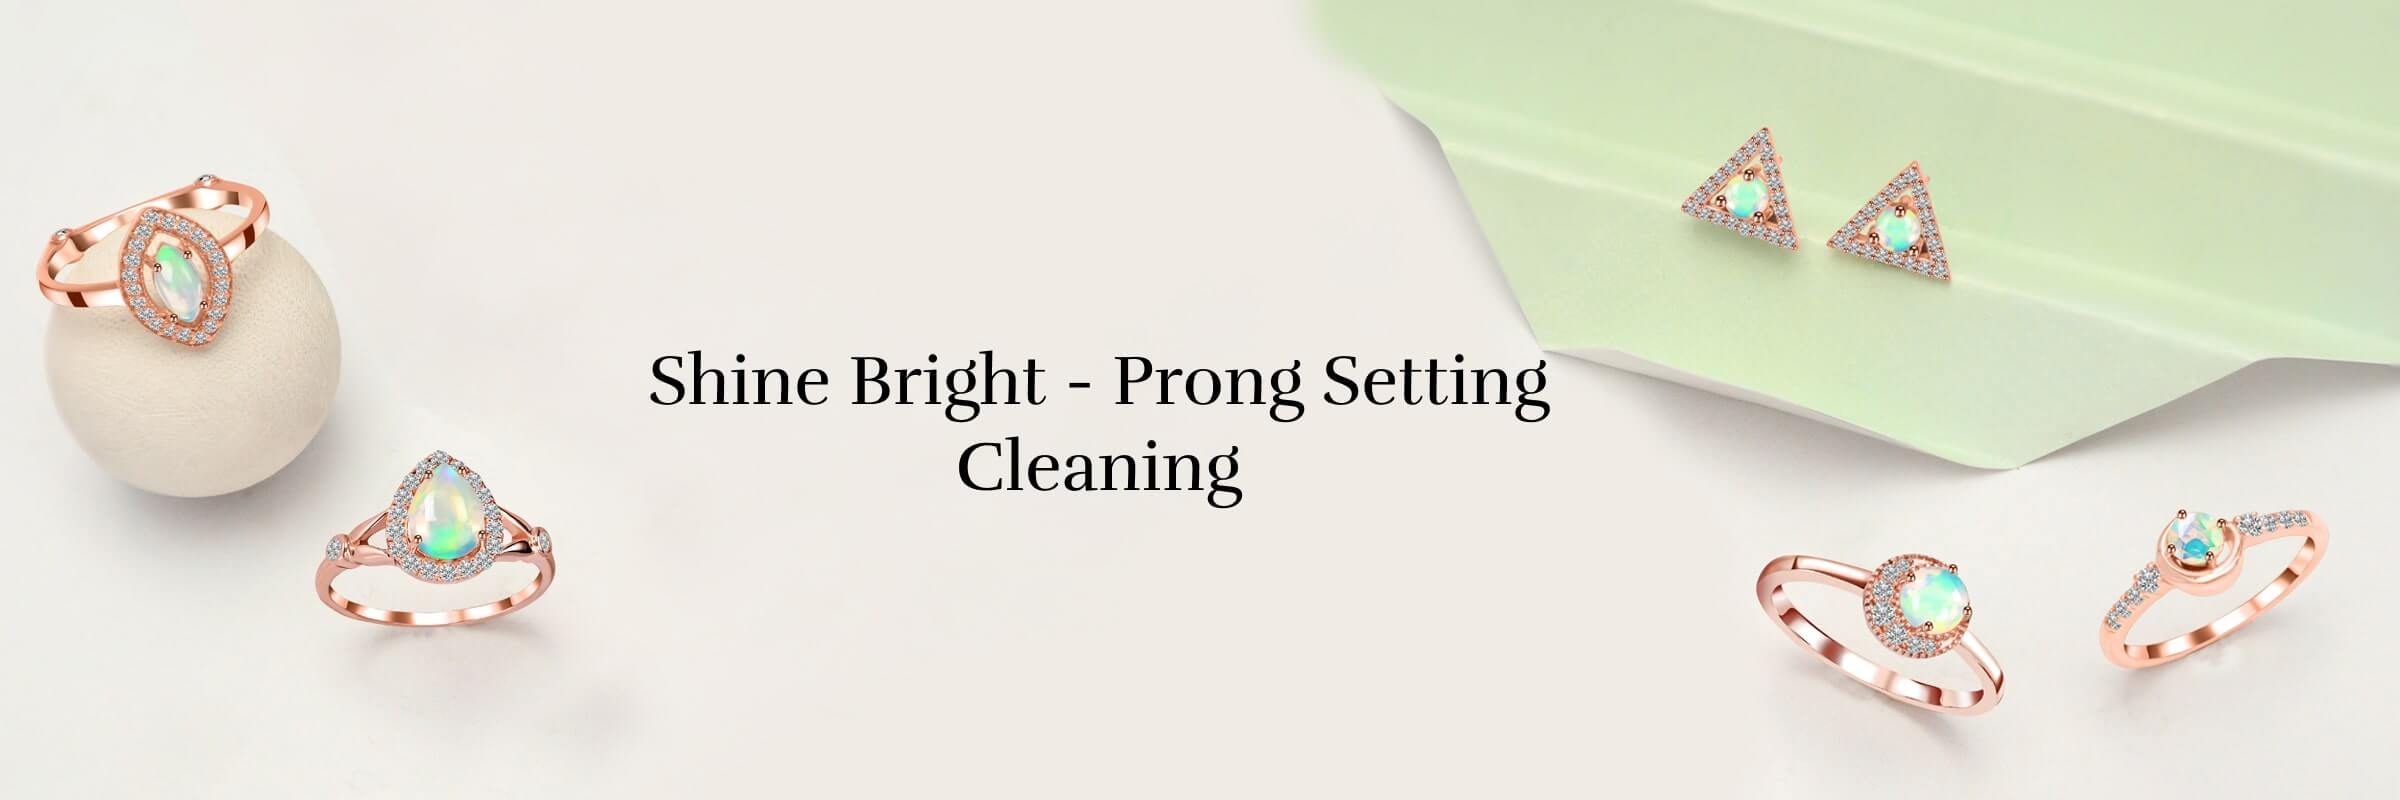 How to Clean a Prong Setting